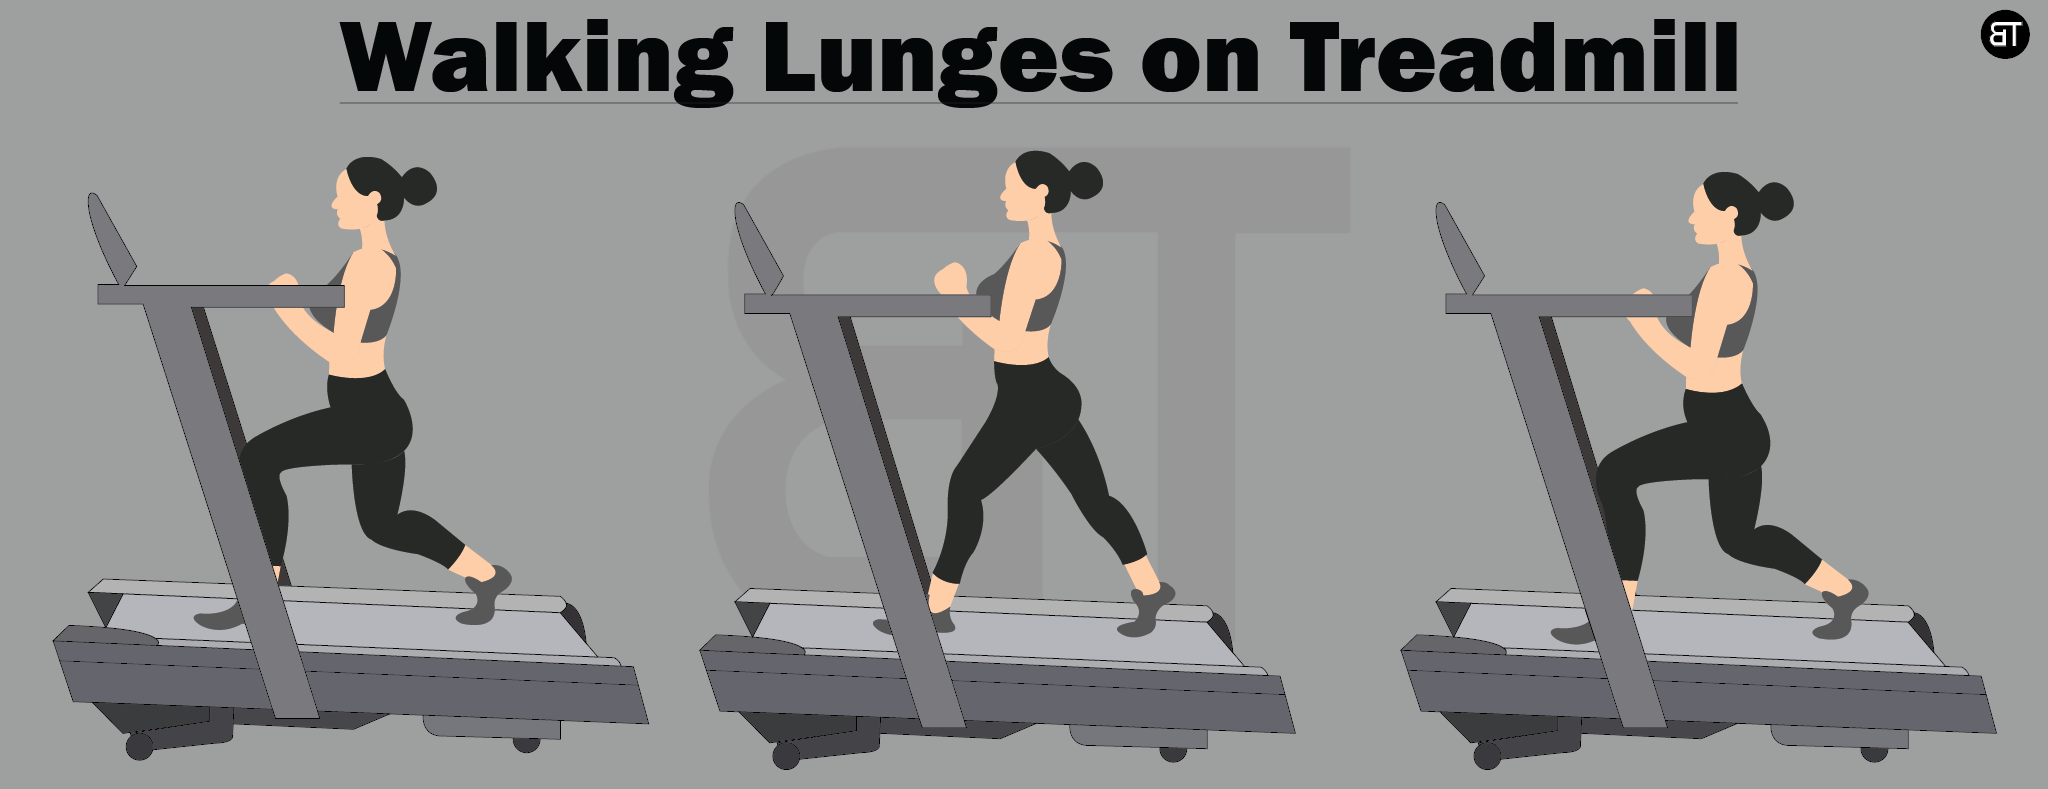 Walking Lunges on treadmill